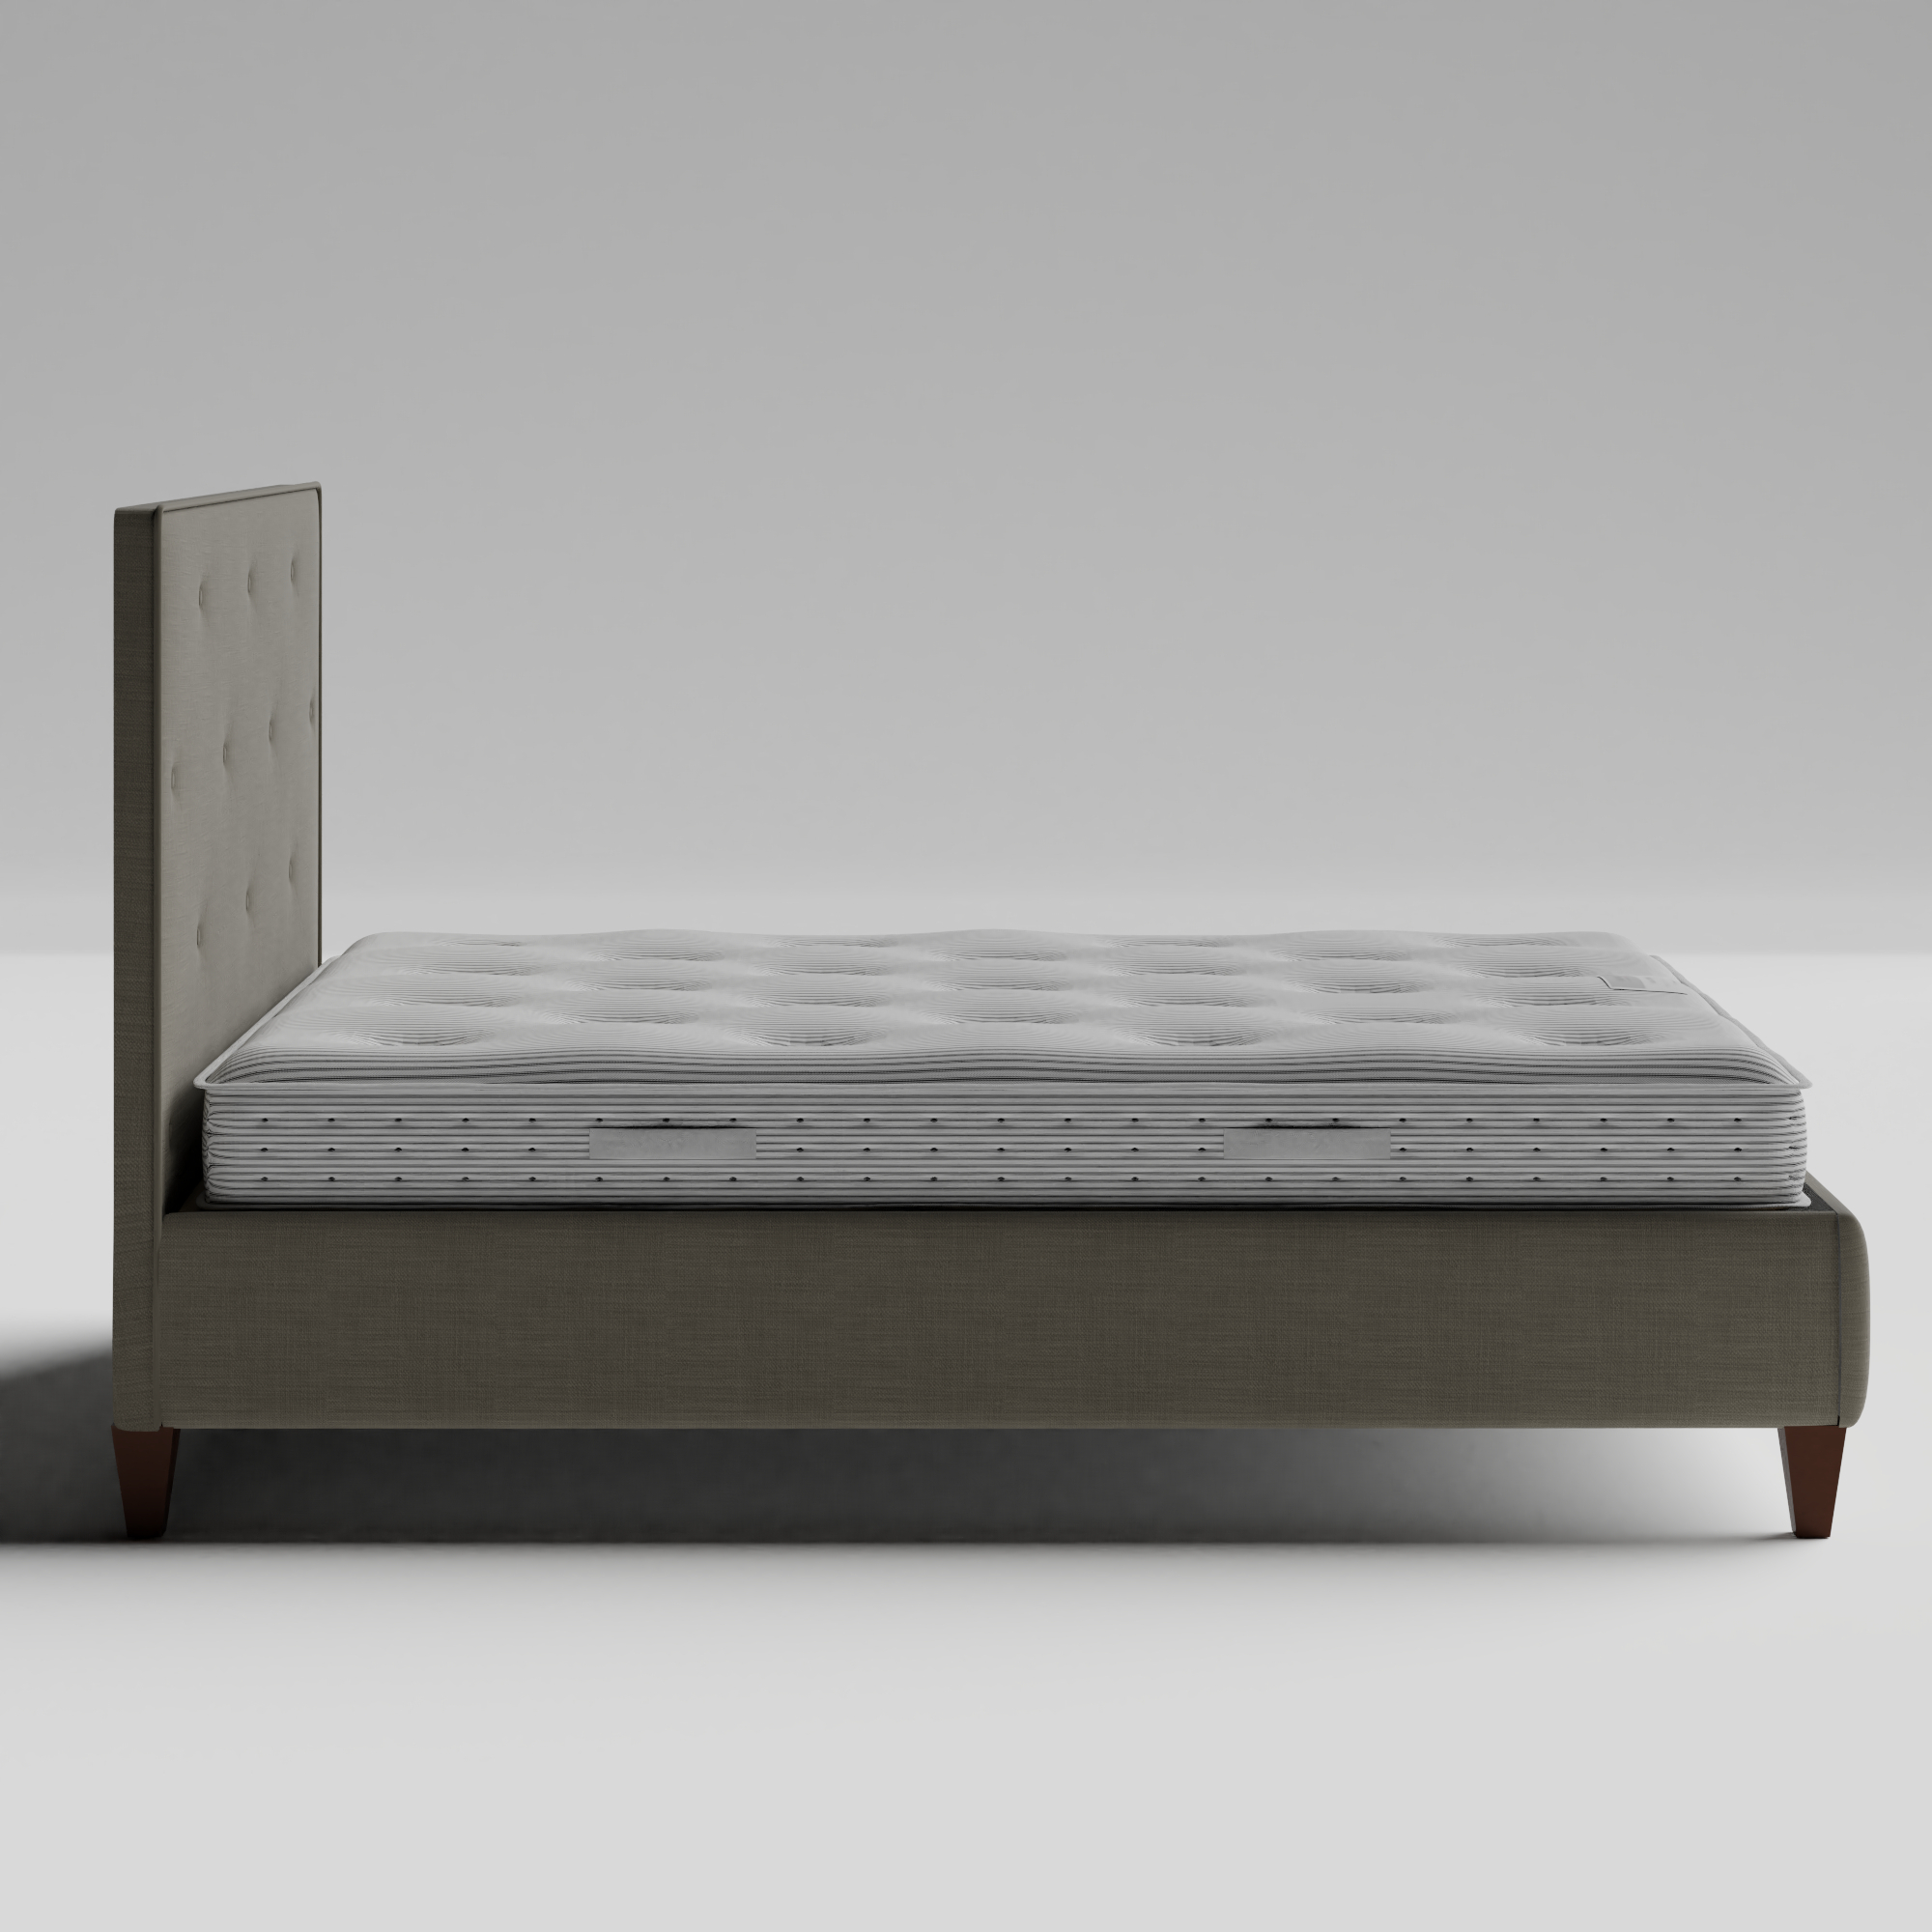 Yushan Buttoned Diagonal stoffen bed in grijs met lades